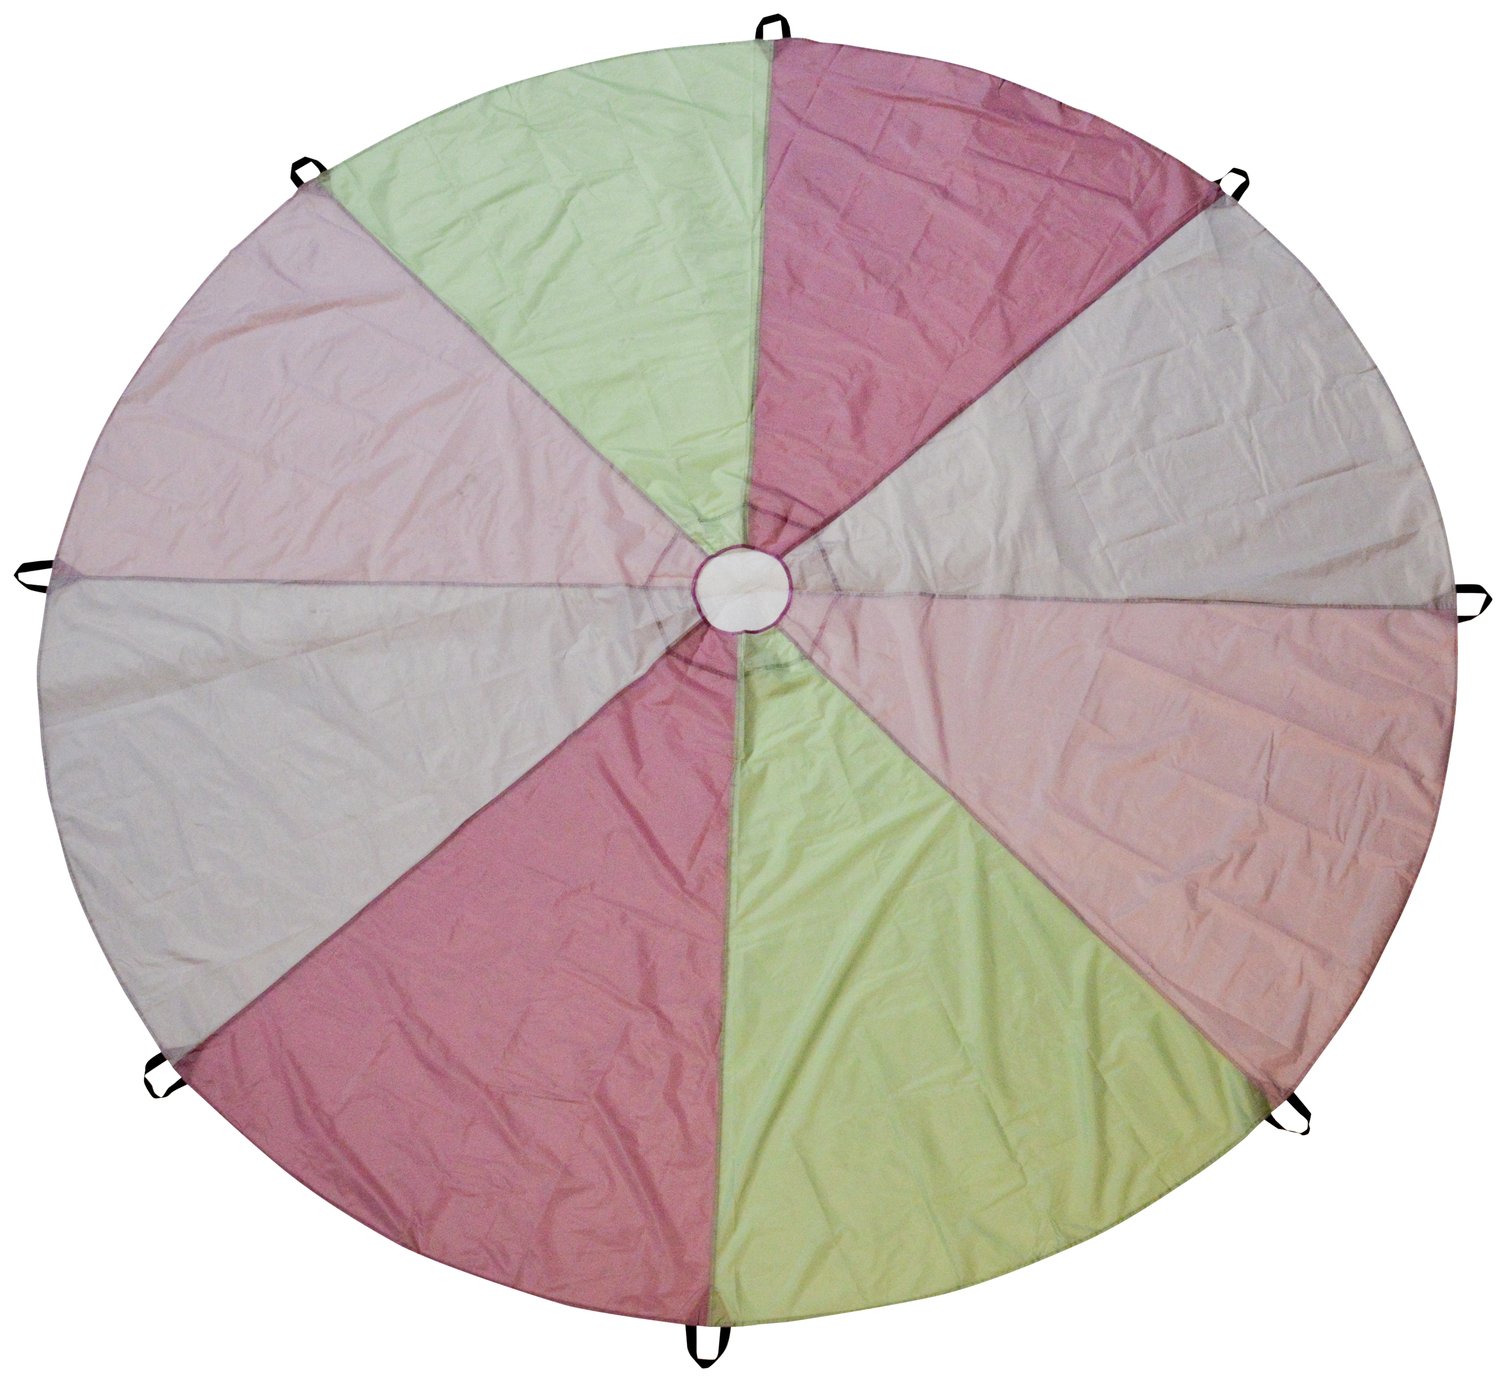 Traditional Garden Games Giant Play Parachute 3.4m review